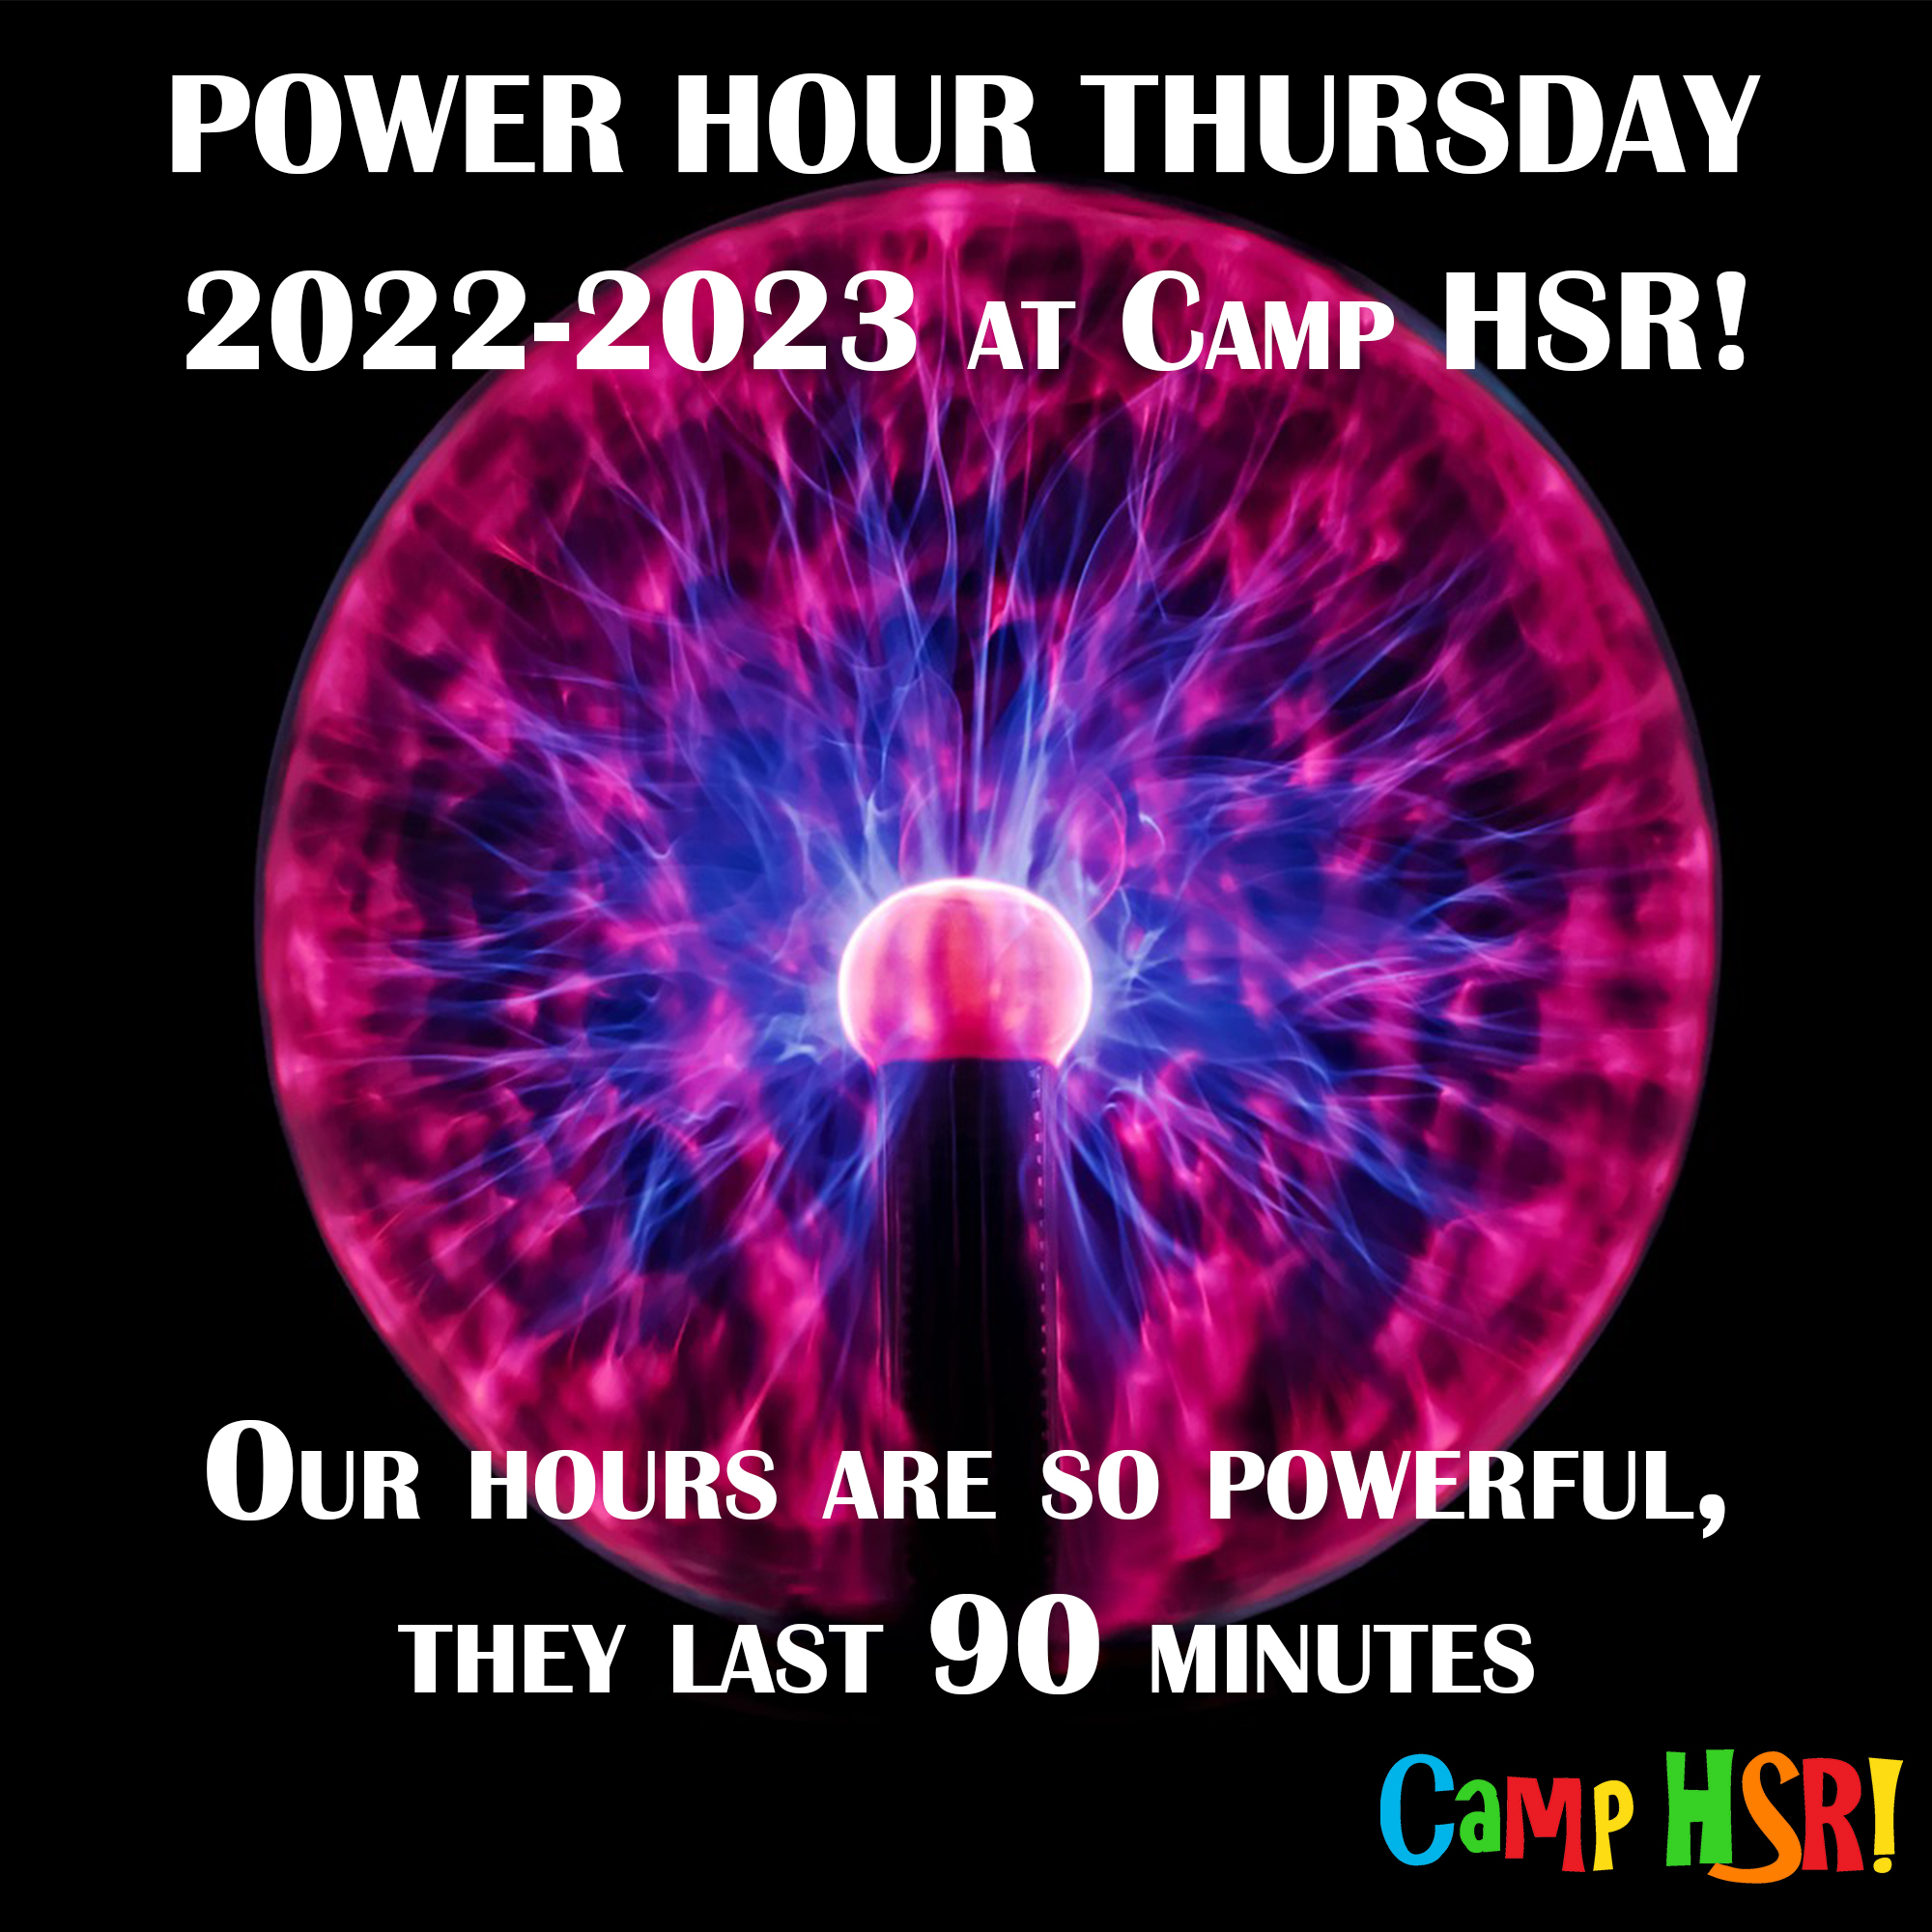 Electricity ball with the caption Power Hour Thursday 2022-2023 at Camp HSR! Our Hours are so powerful, they last 90 minutes